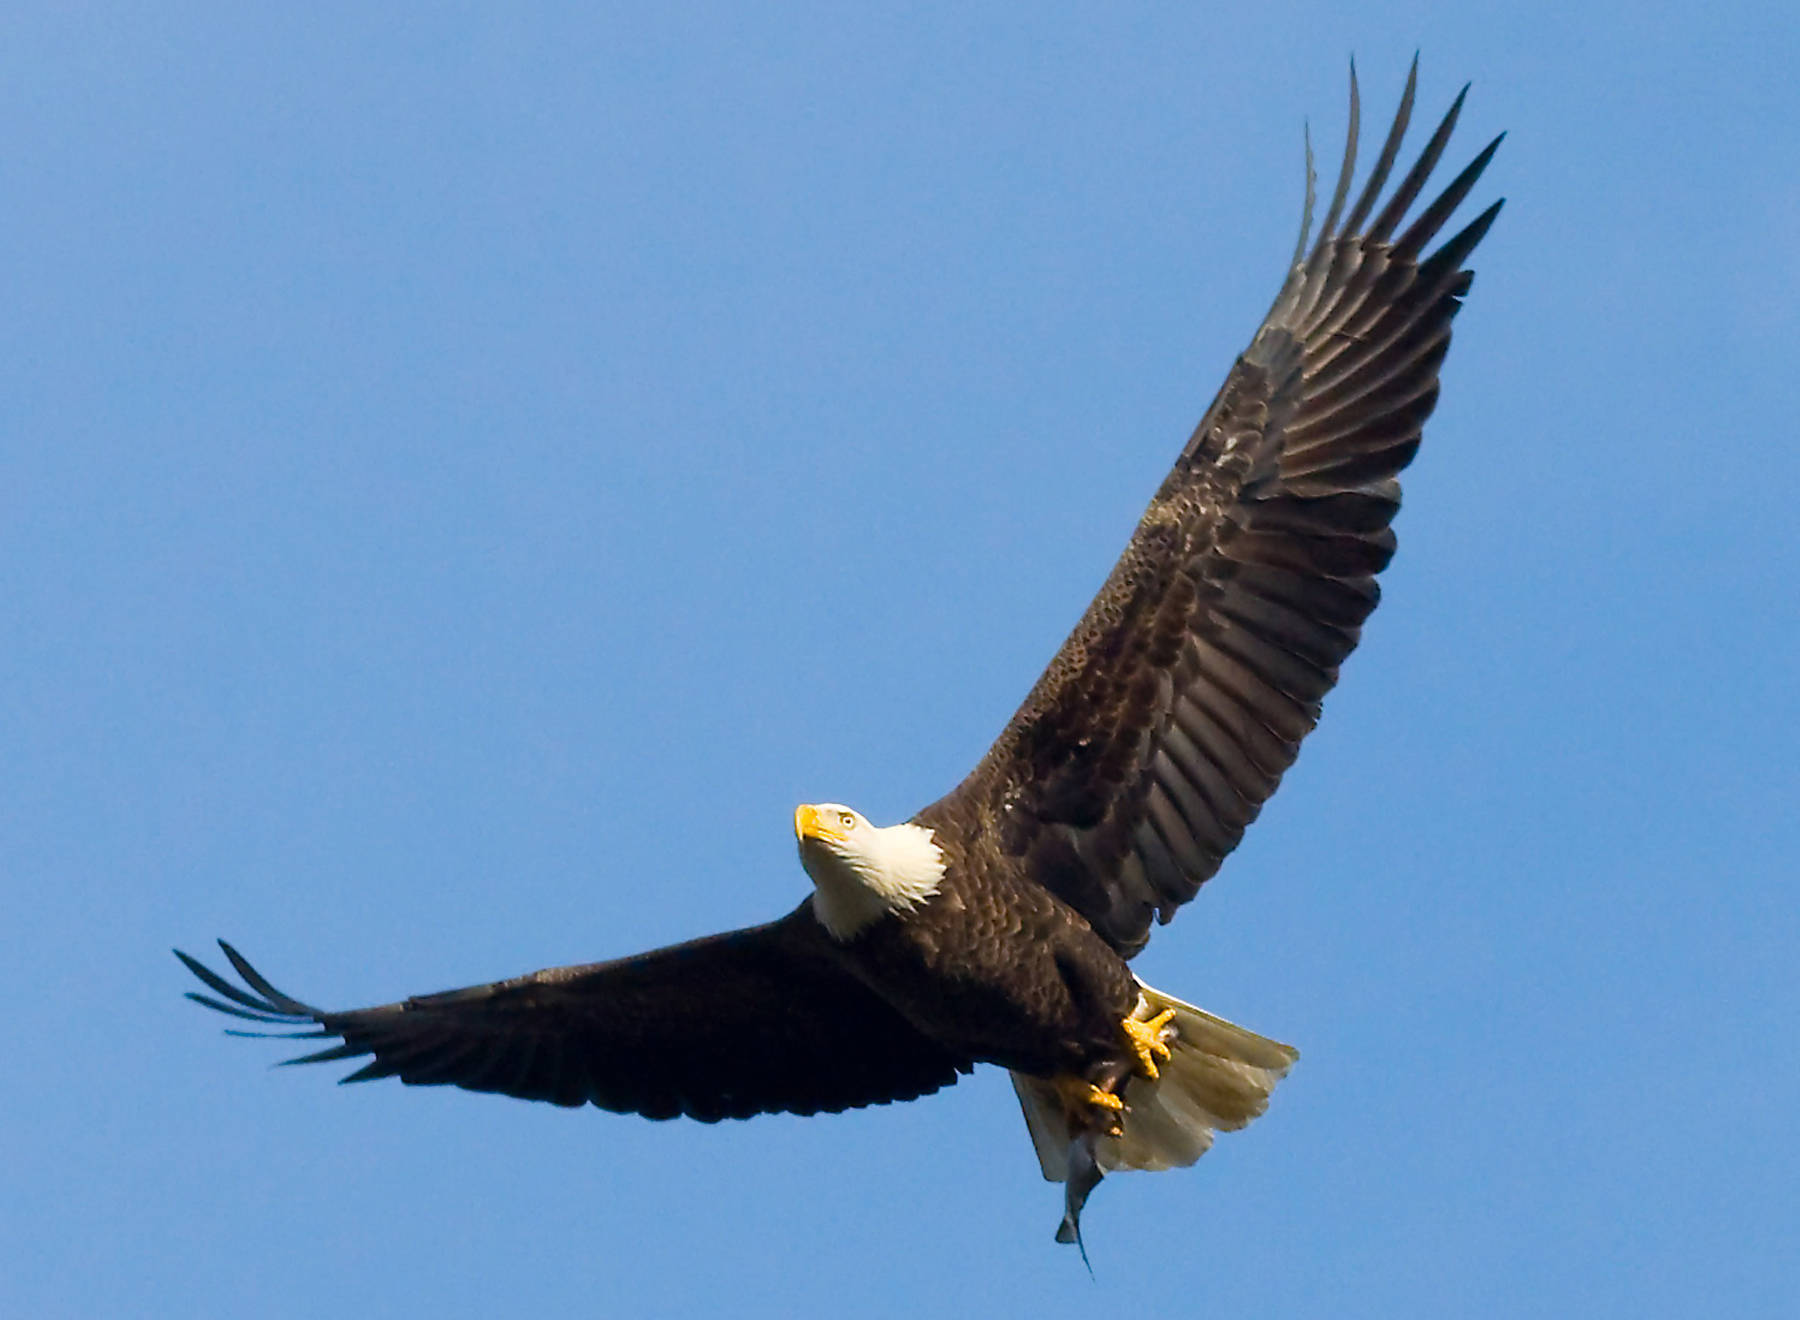 Bald Eagle soaring in clear blue sky with a fish